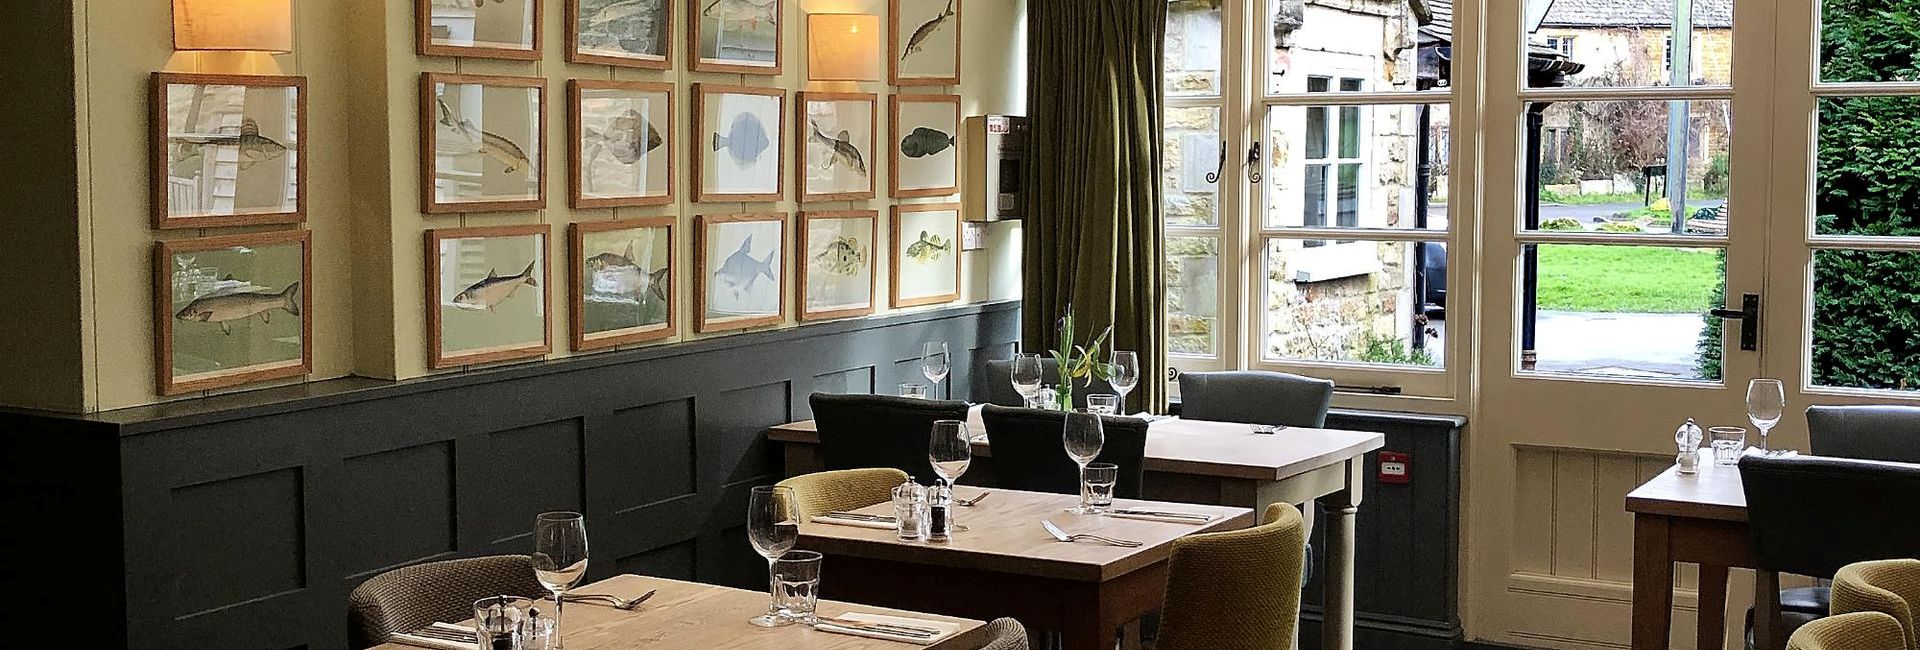 Interior of the restaurant at the King's Head Inn with woodden tables, chairs and framed pictures of fish on the wall